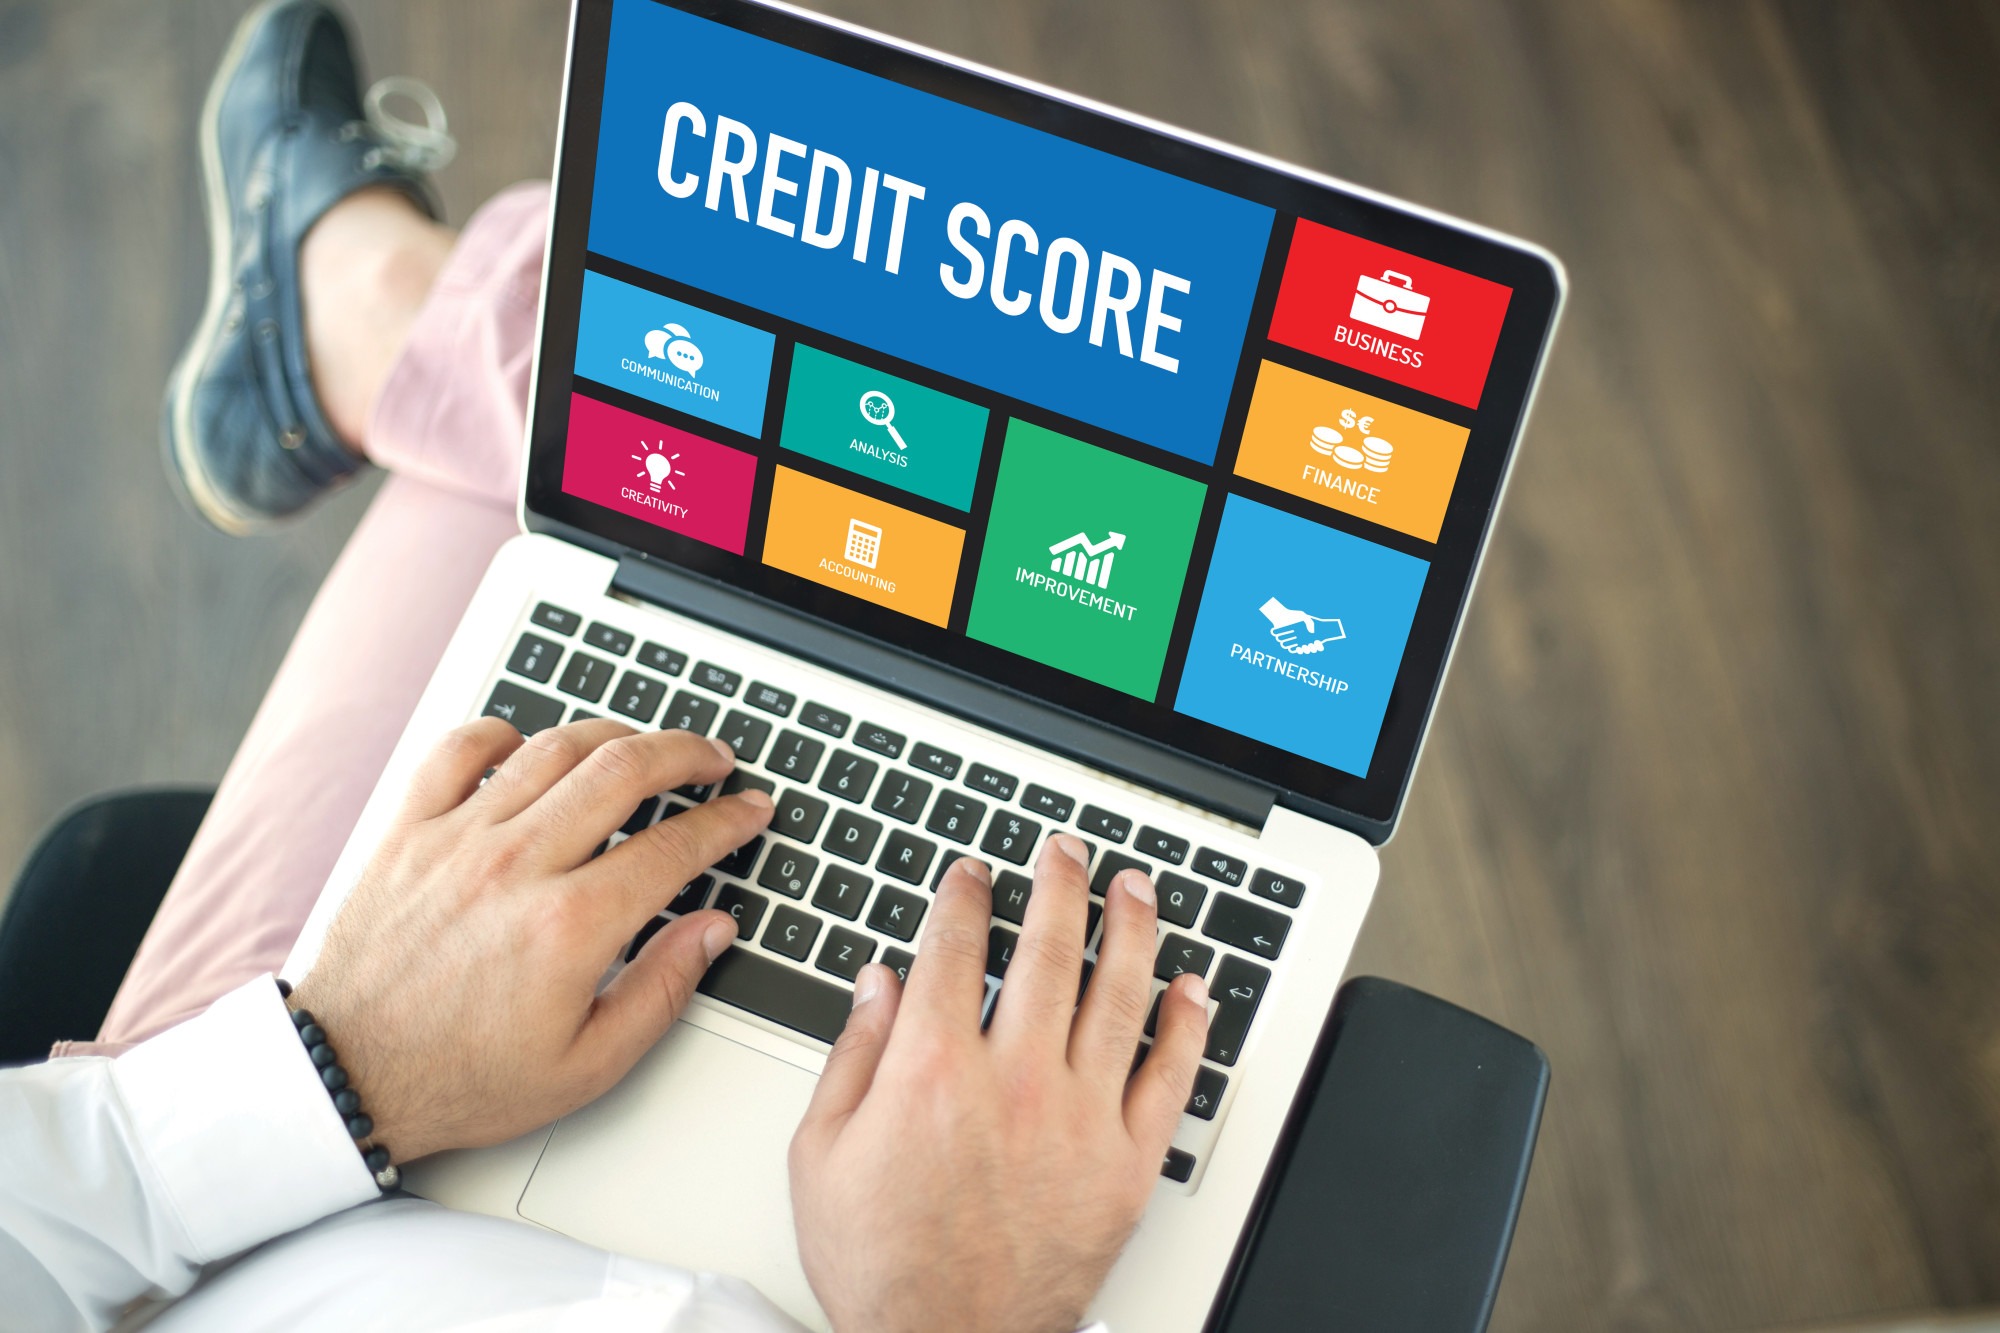 Why Is It Important to Have a Good Credit Score?